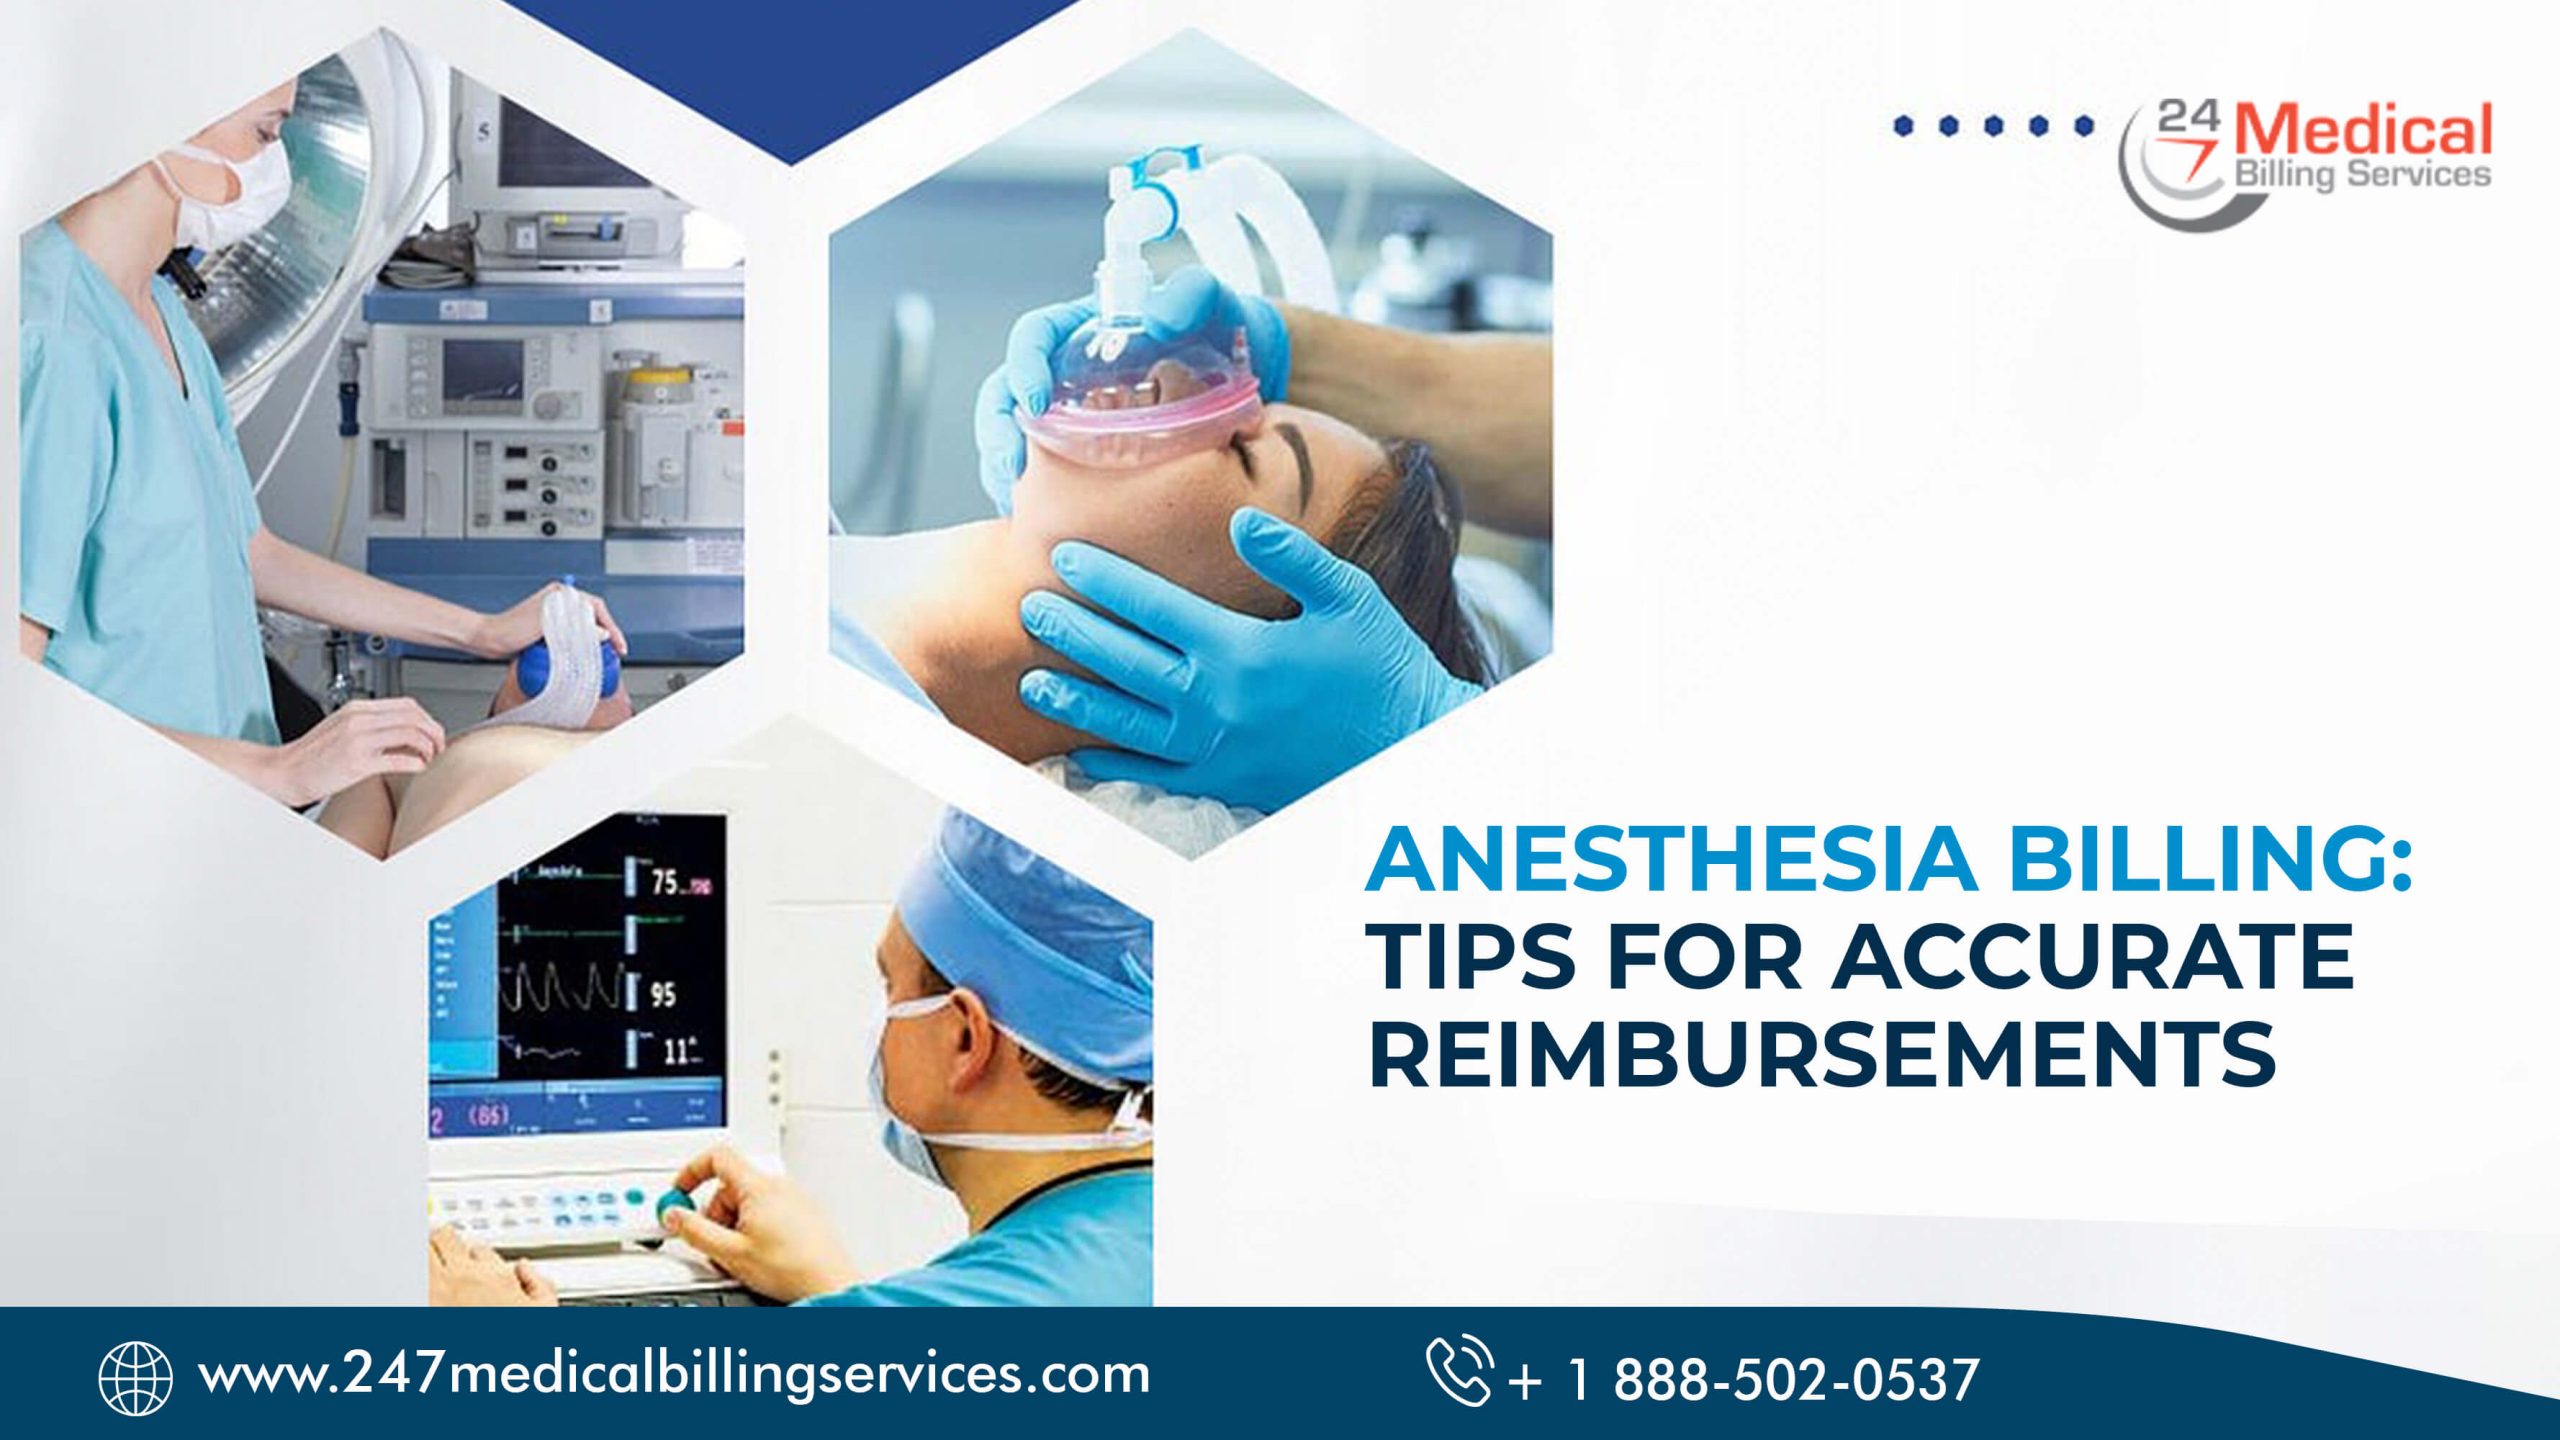  Anesthesia Billing: Tips for Accurate Reimbursements